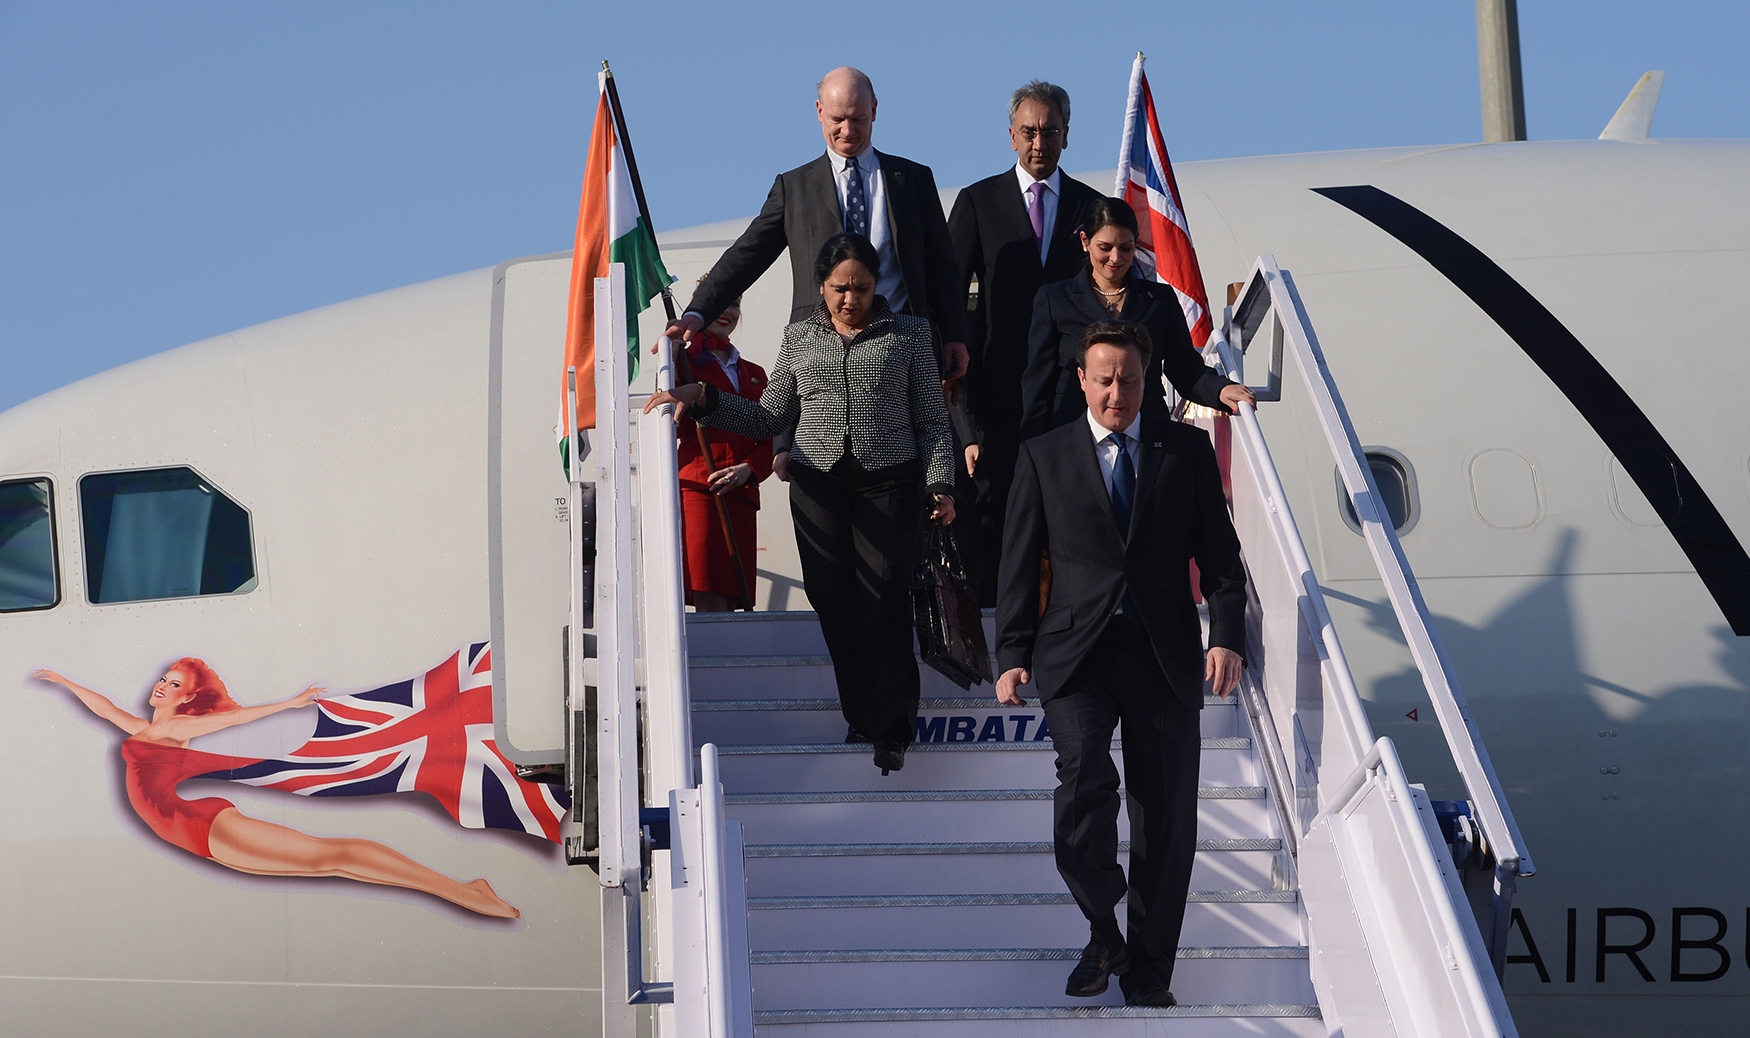 Asha (second row, left) arrives in Mumbai with Prime Minister David Cameron